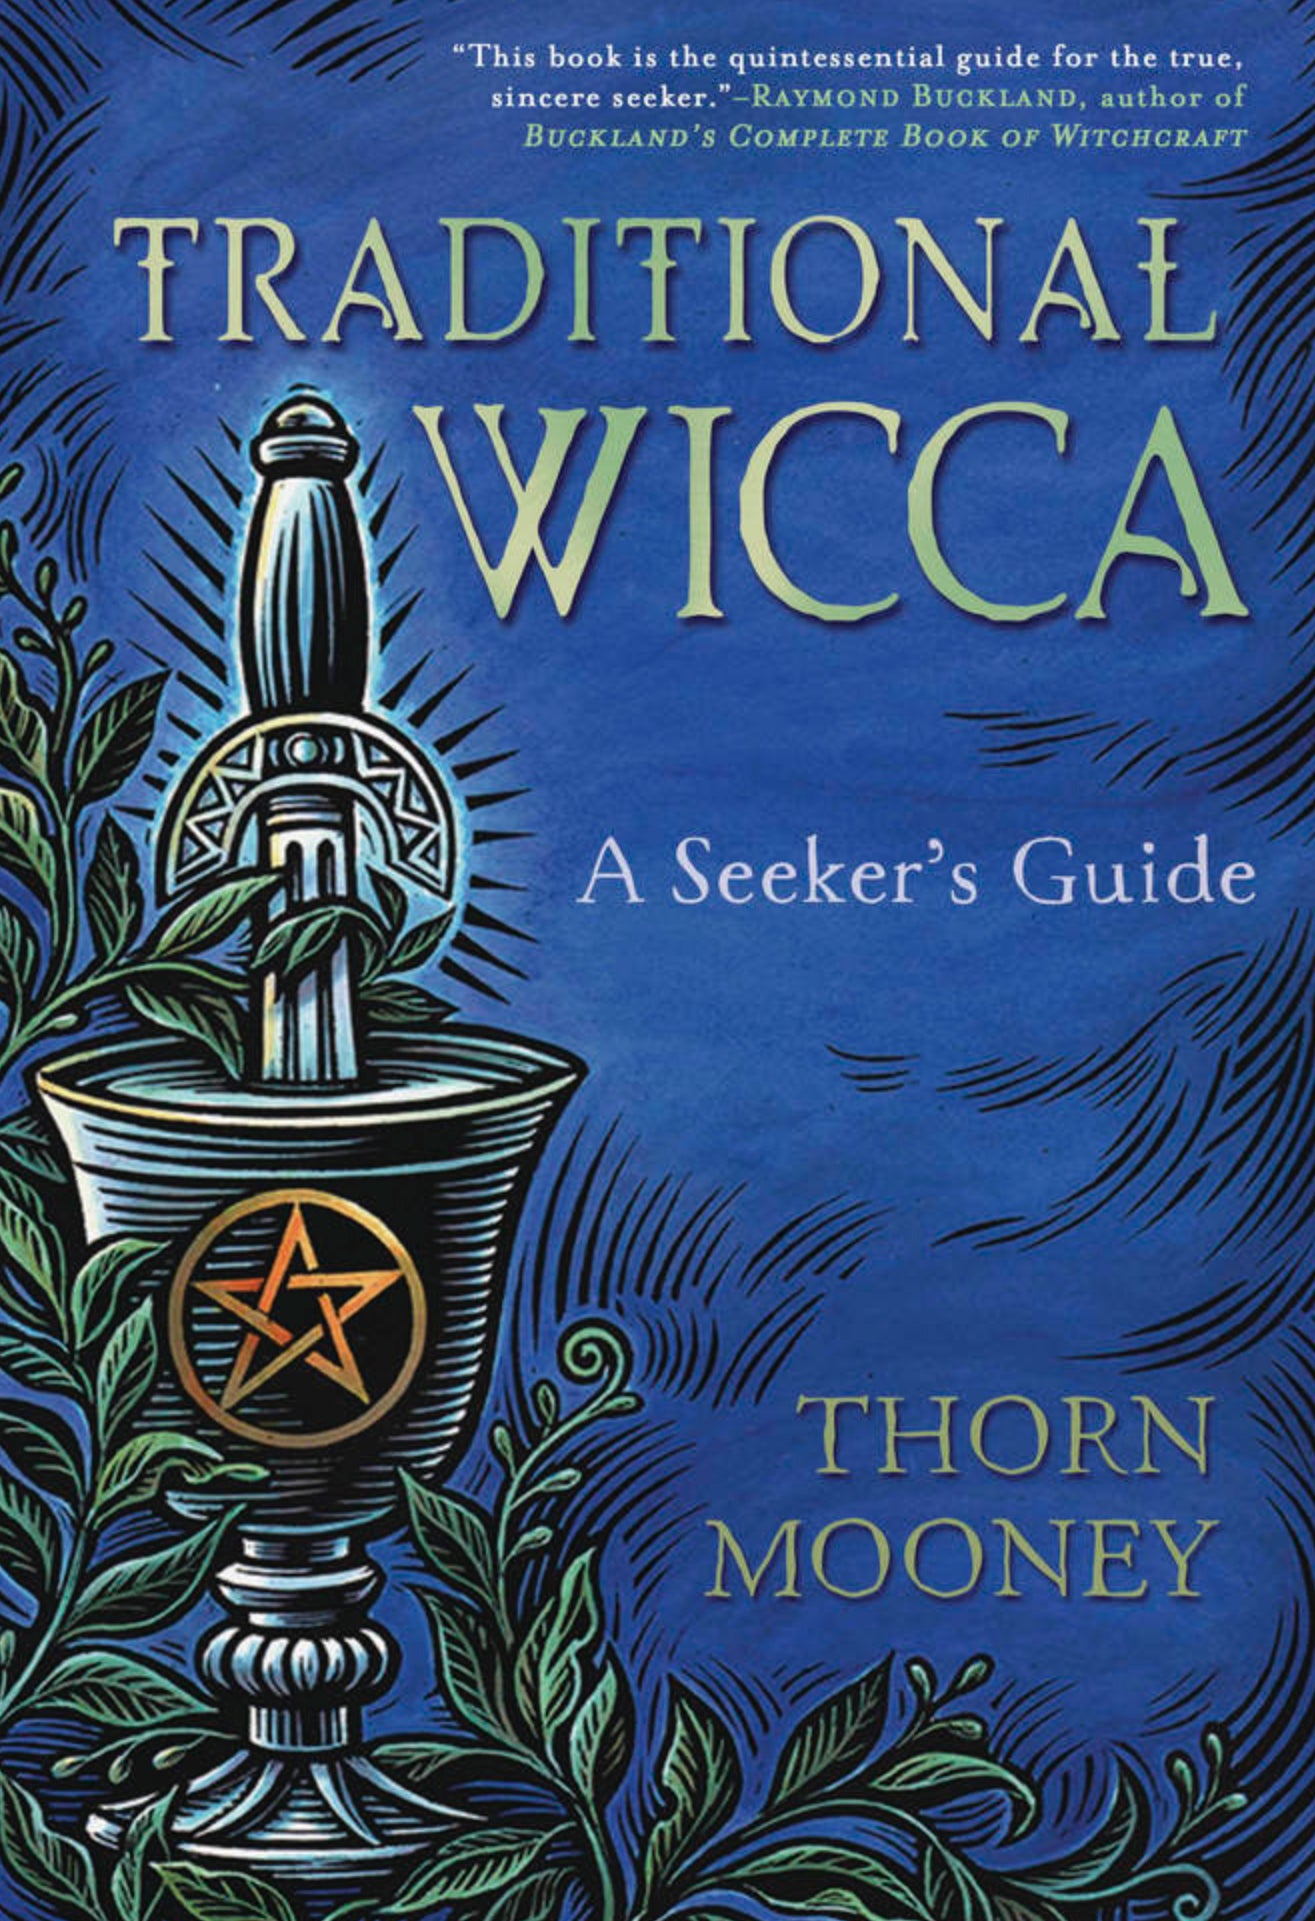 traditional wicca-a seeker’s guide by Thorn Mooney